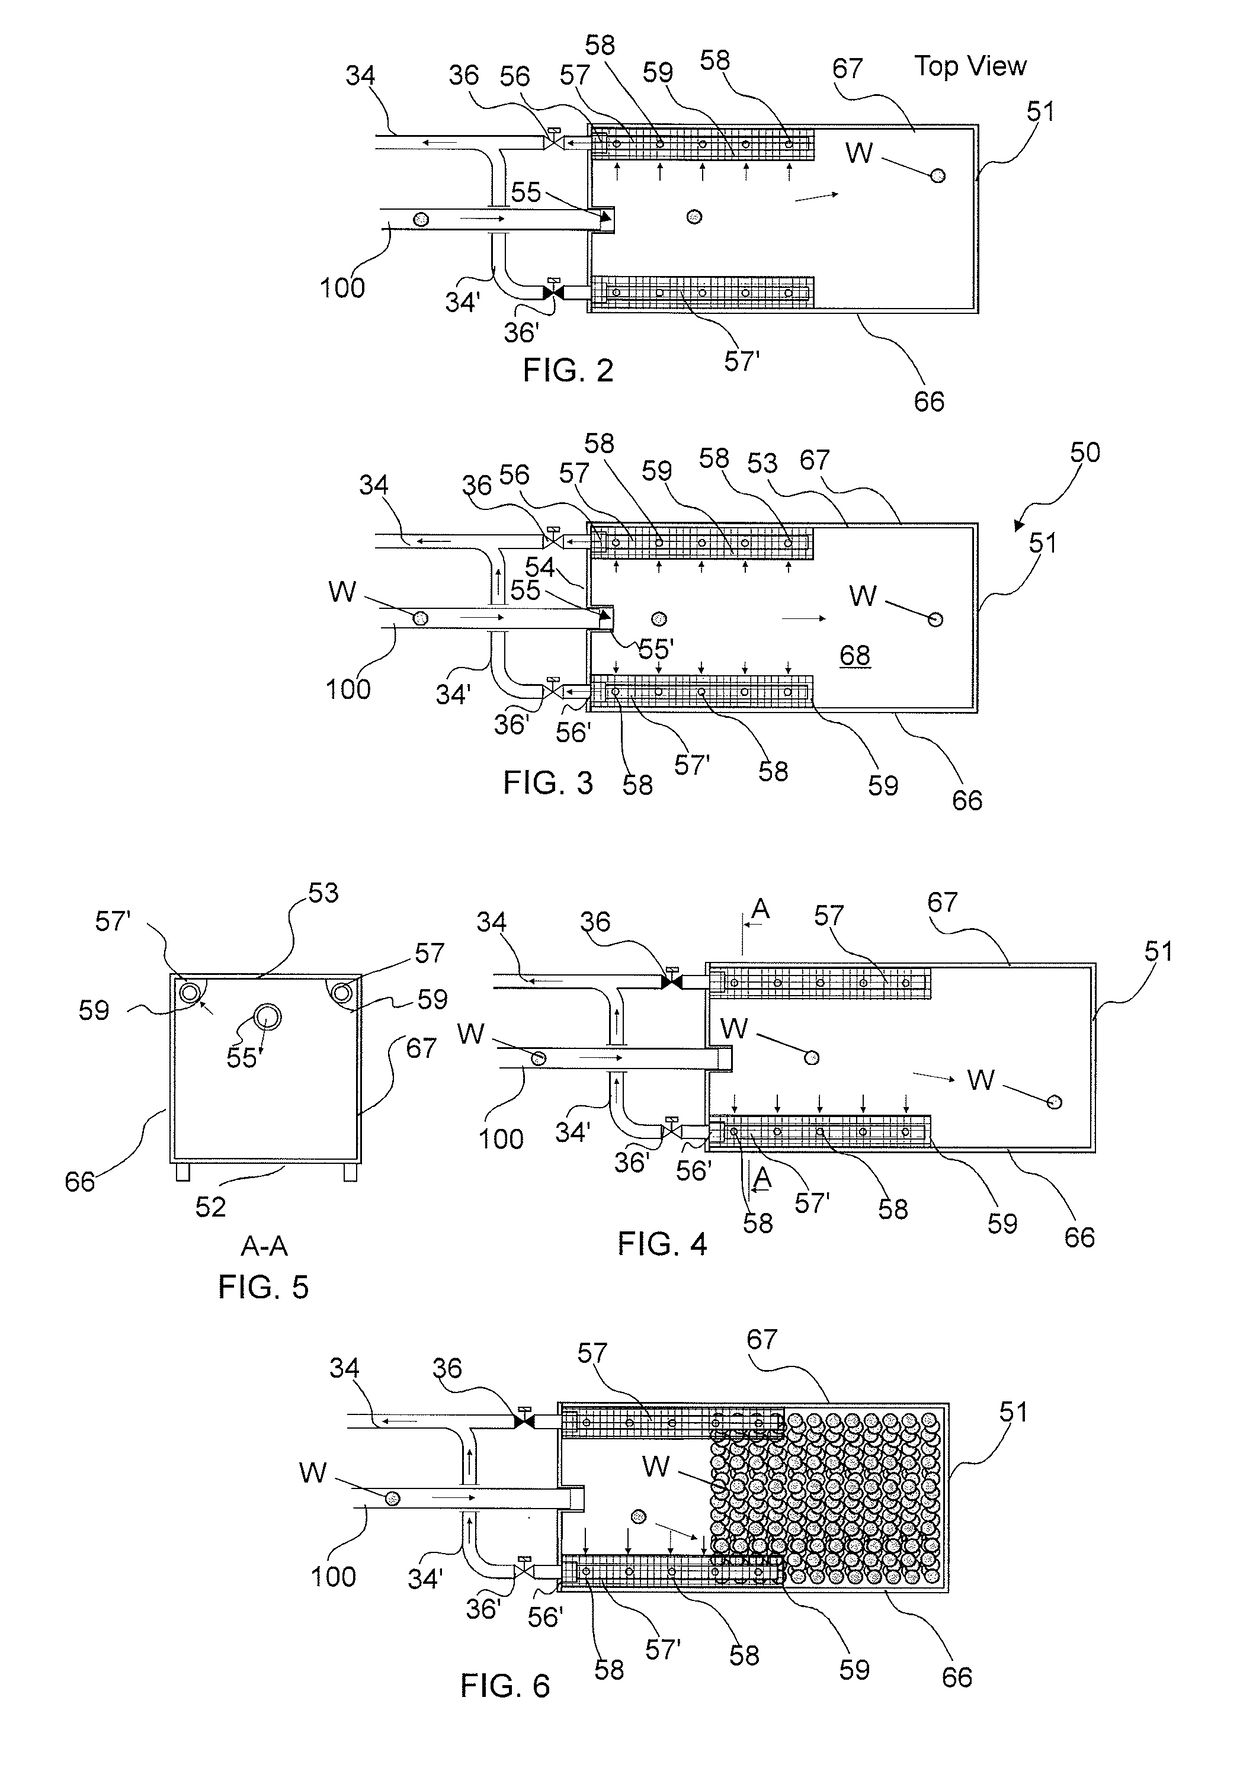 Method and apparatus in pneumatic materials handling and a waste container/separating device